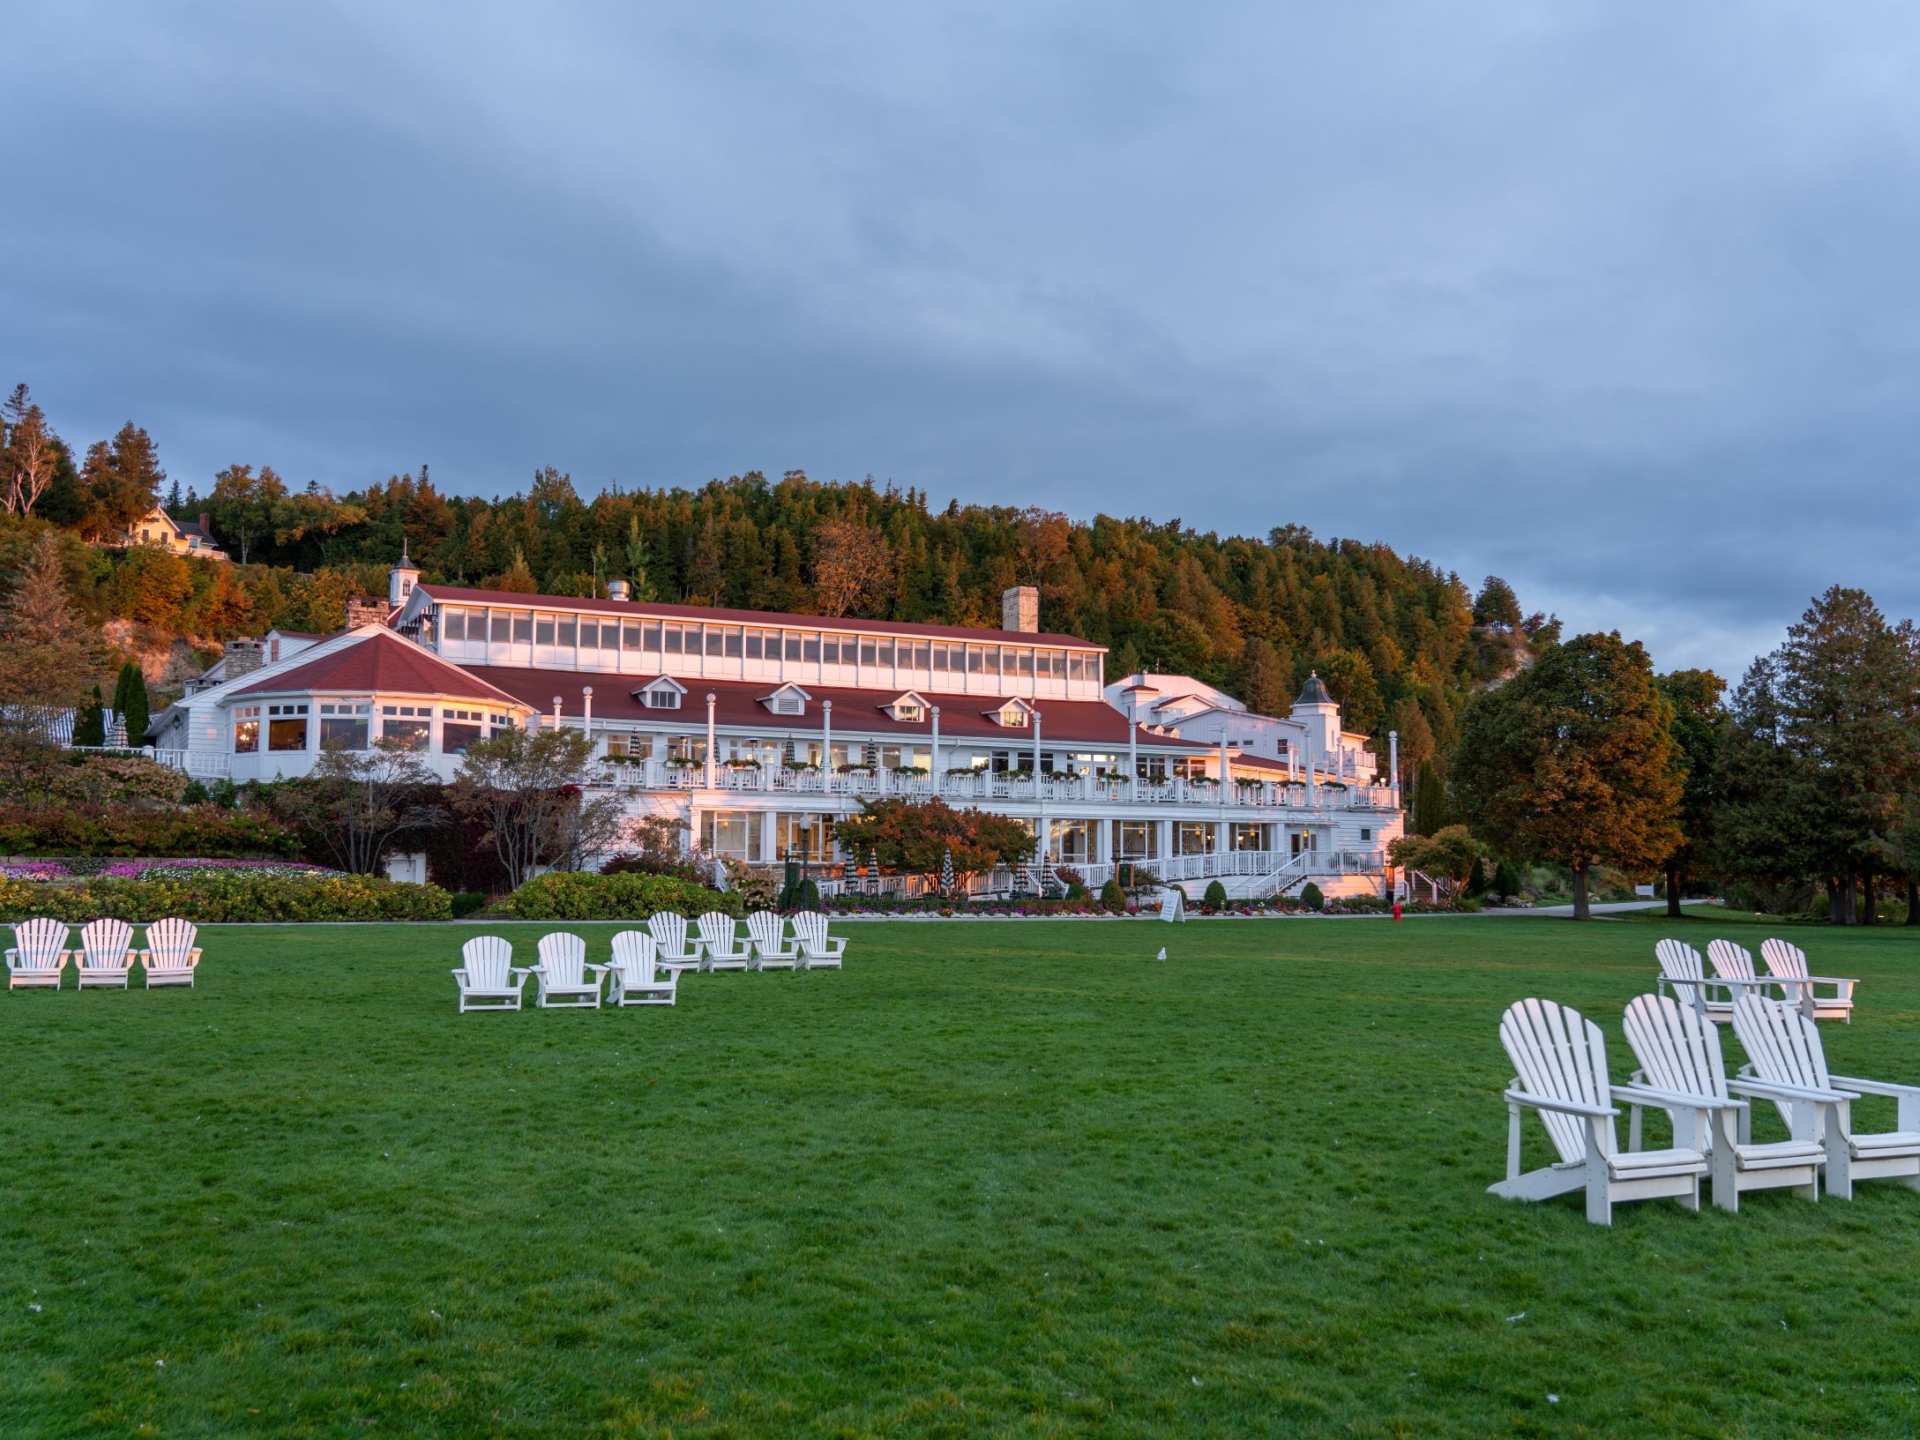 Mission Point resort | The Great Lawn, and Mission Point resort on Mackinac Island